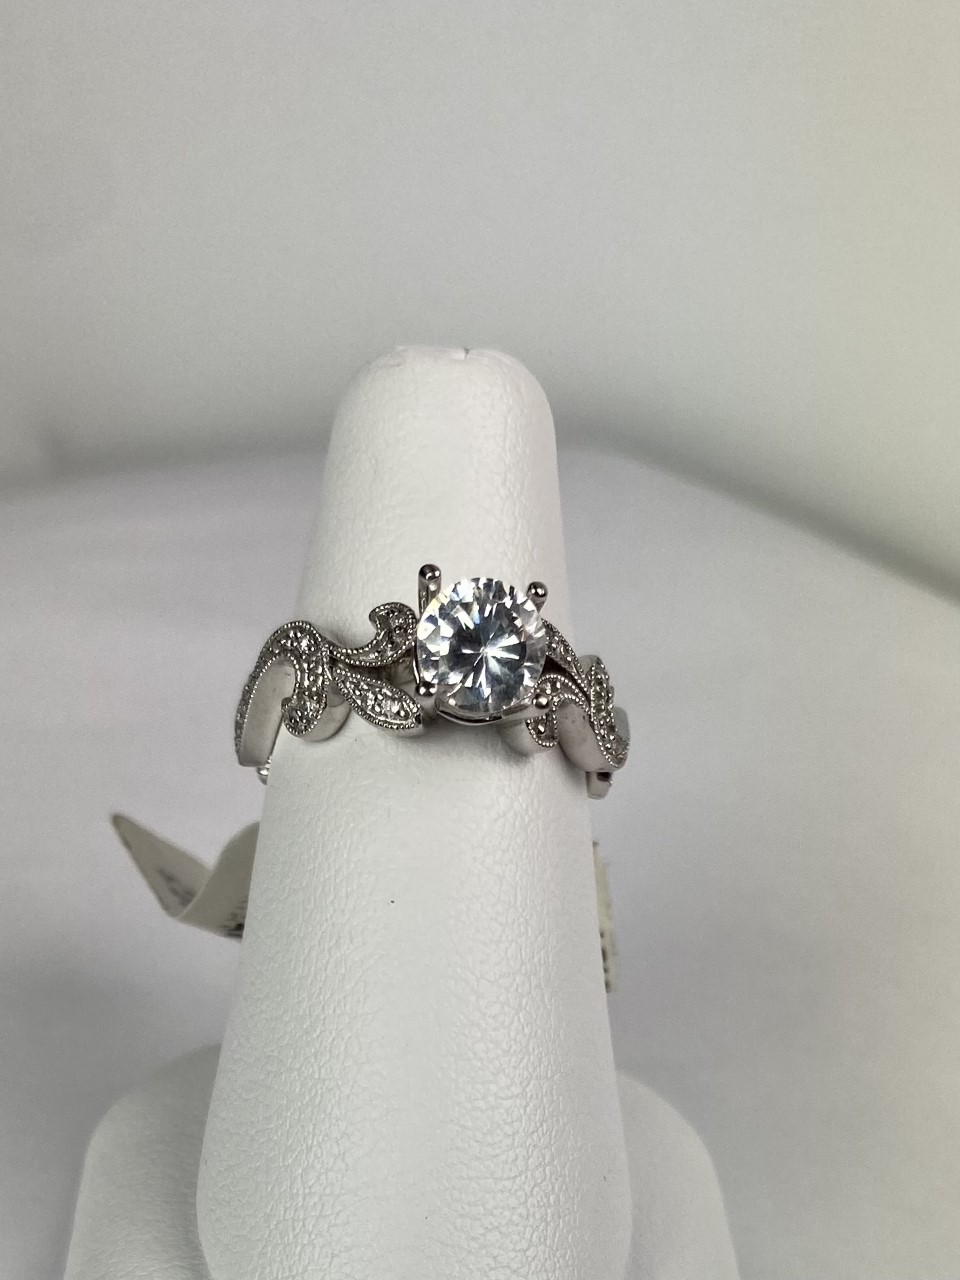 White Gold and Diamond Floral Ring